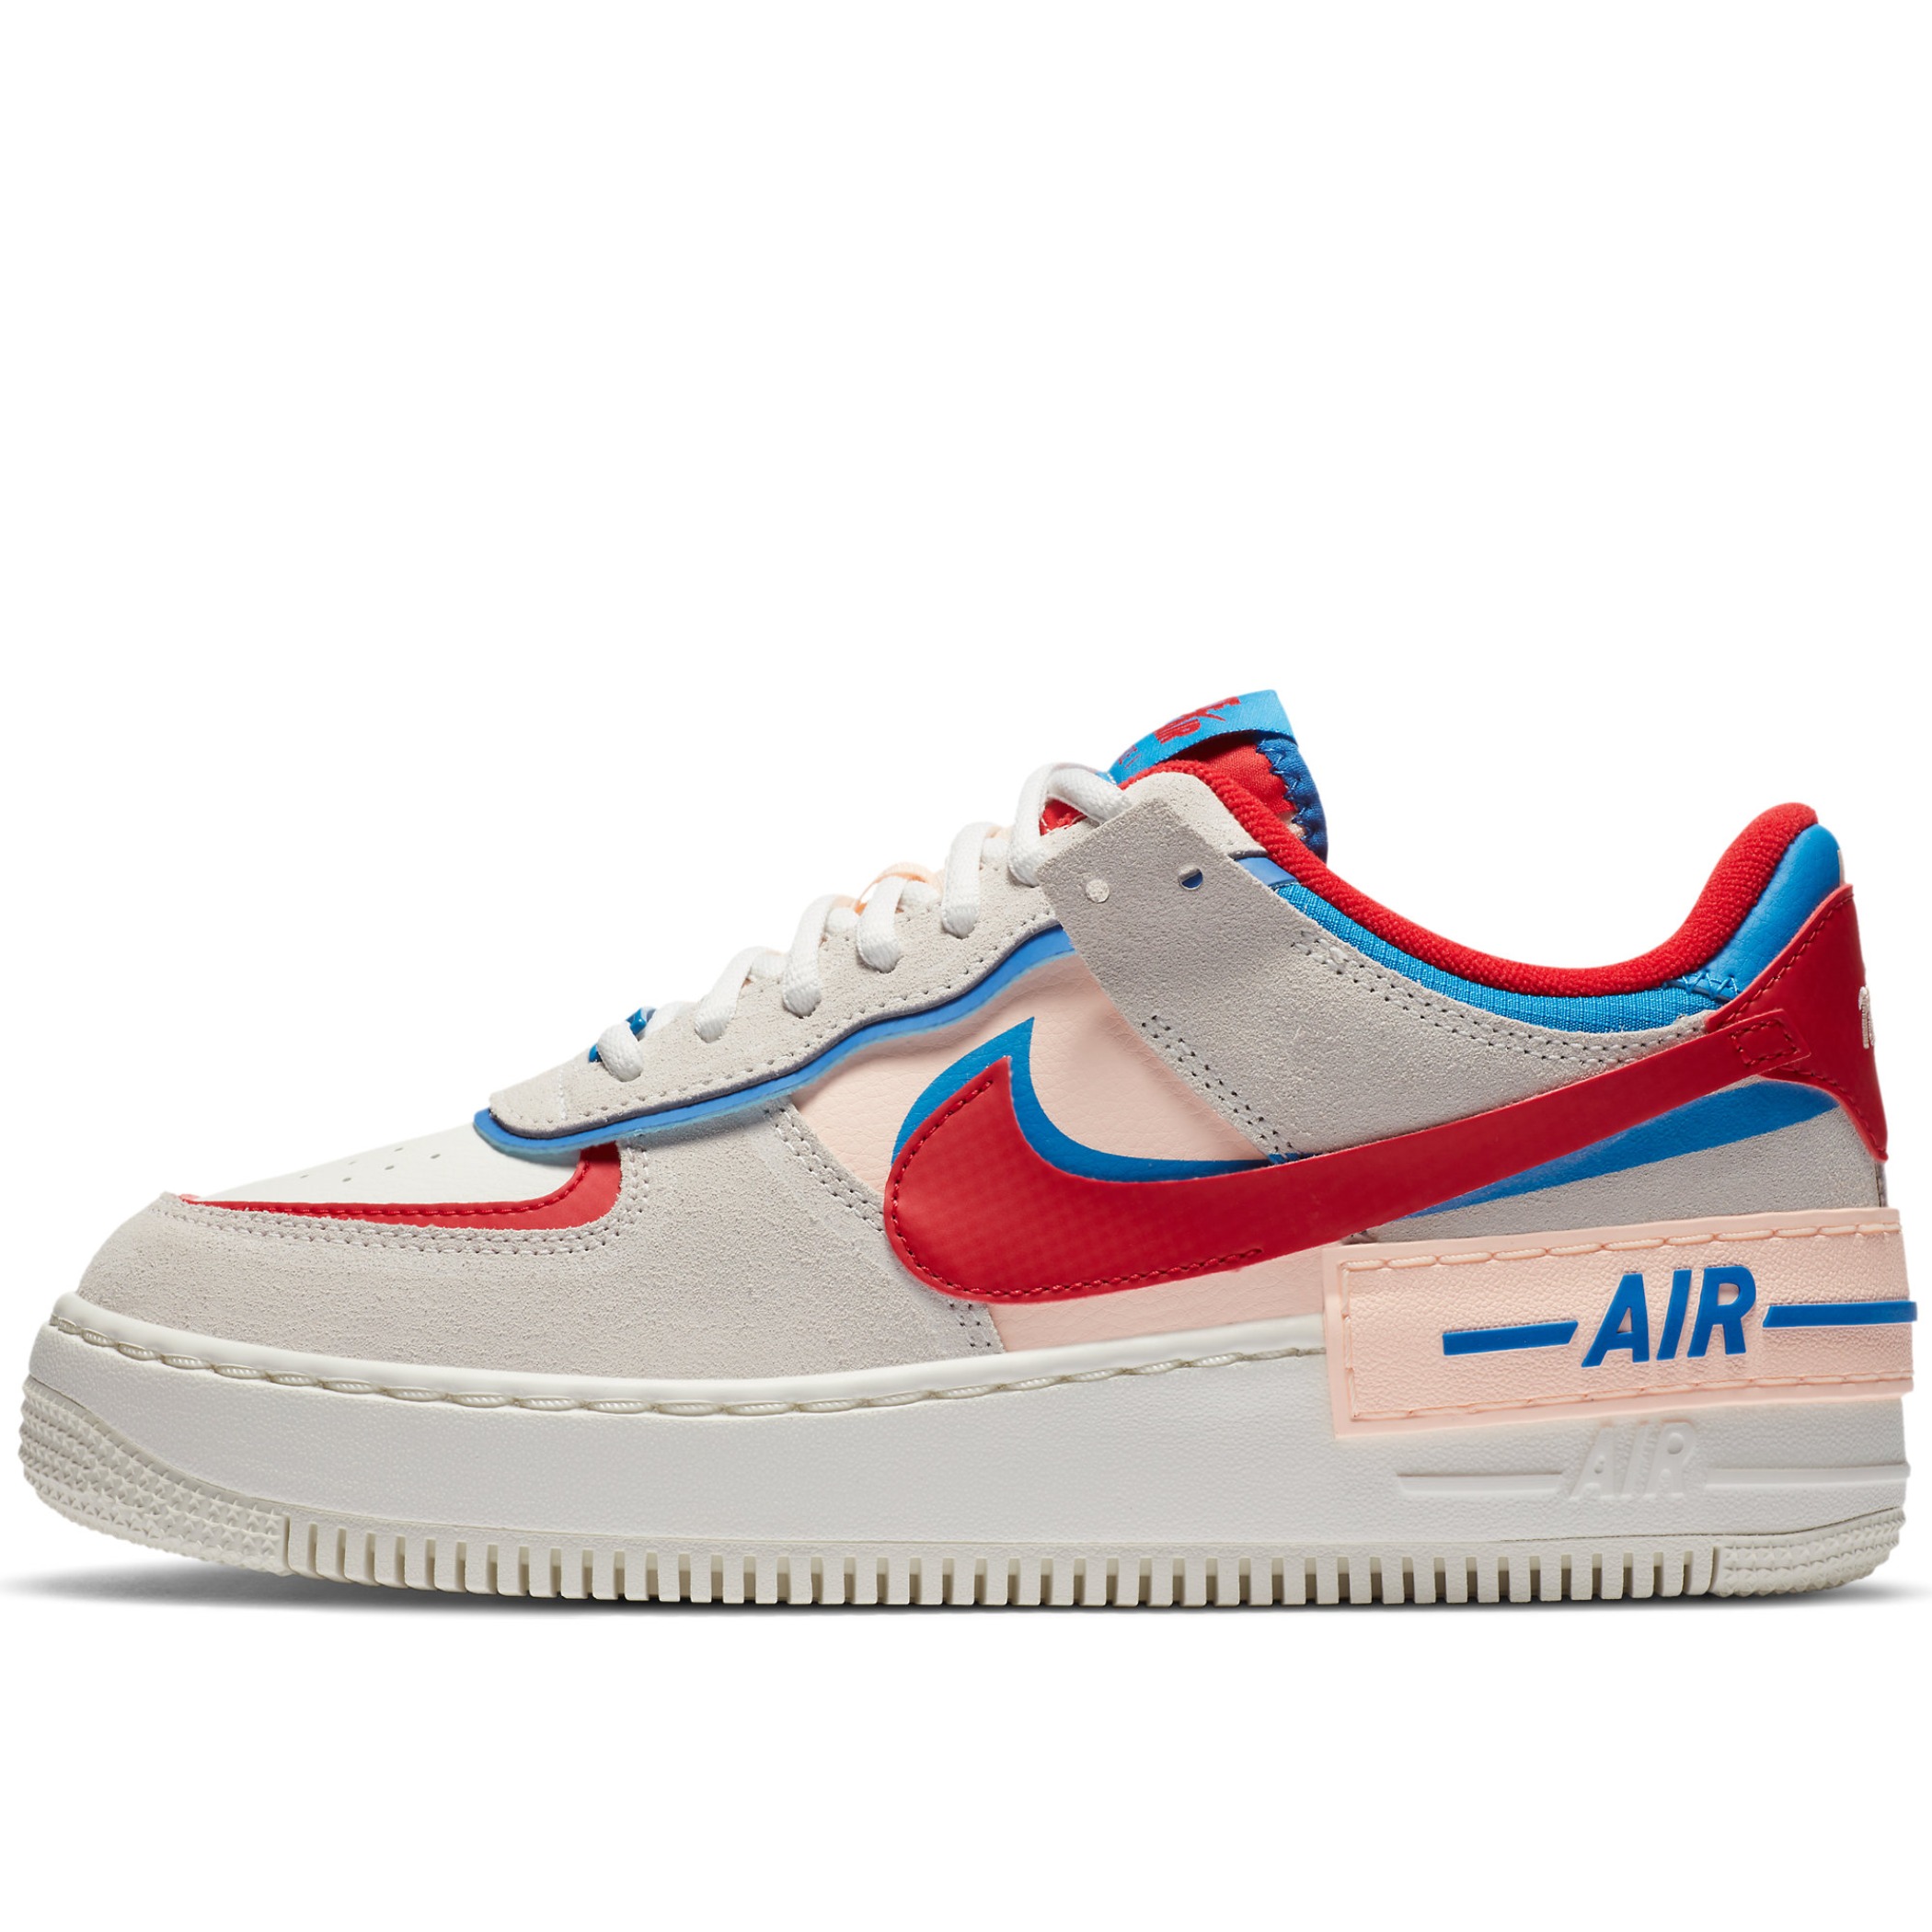 nike air force 1 red shadow